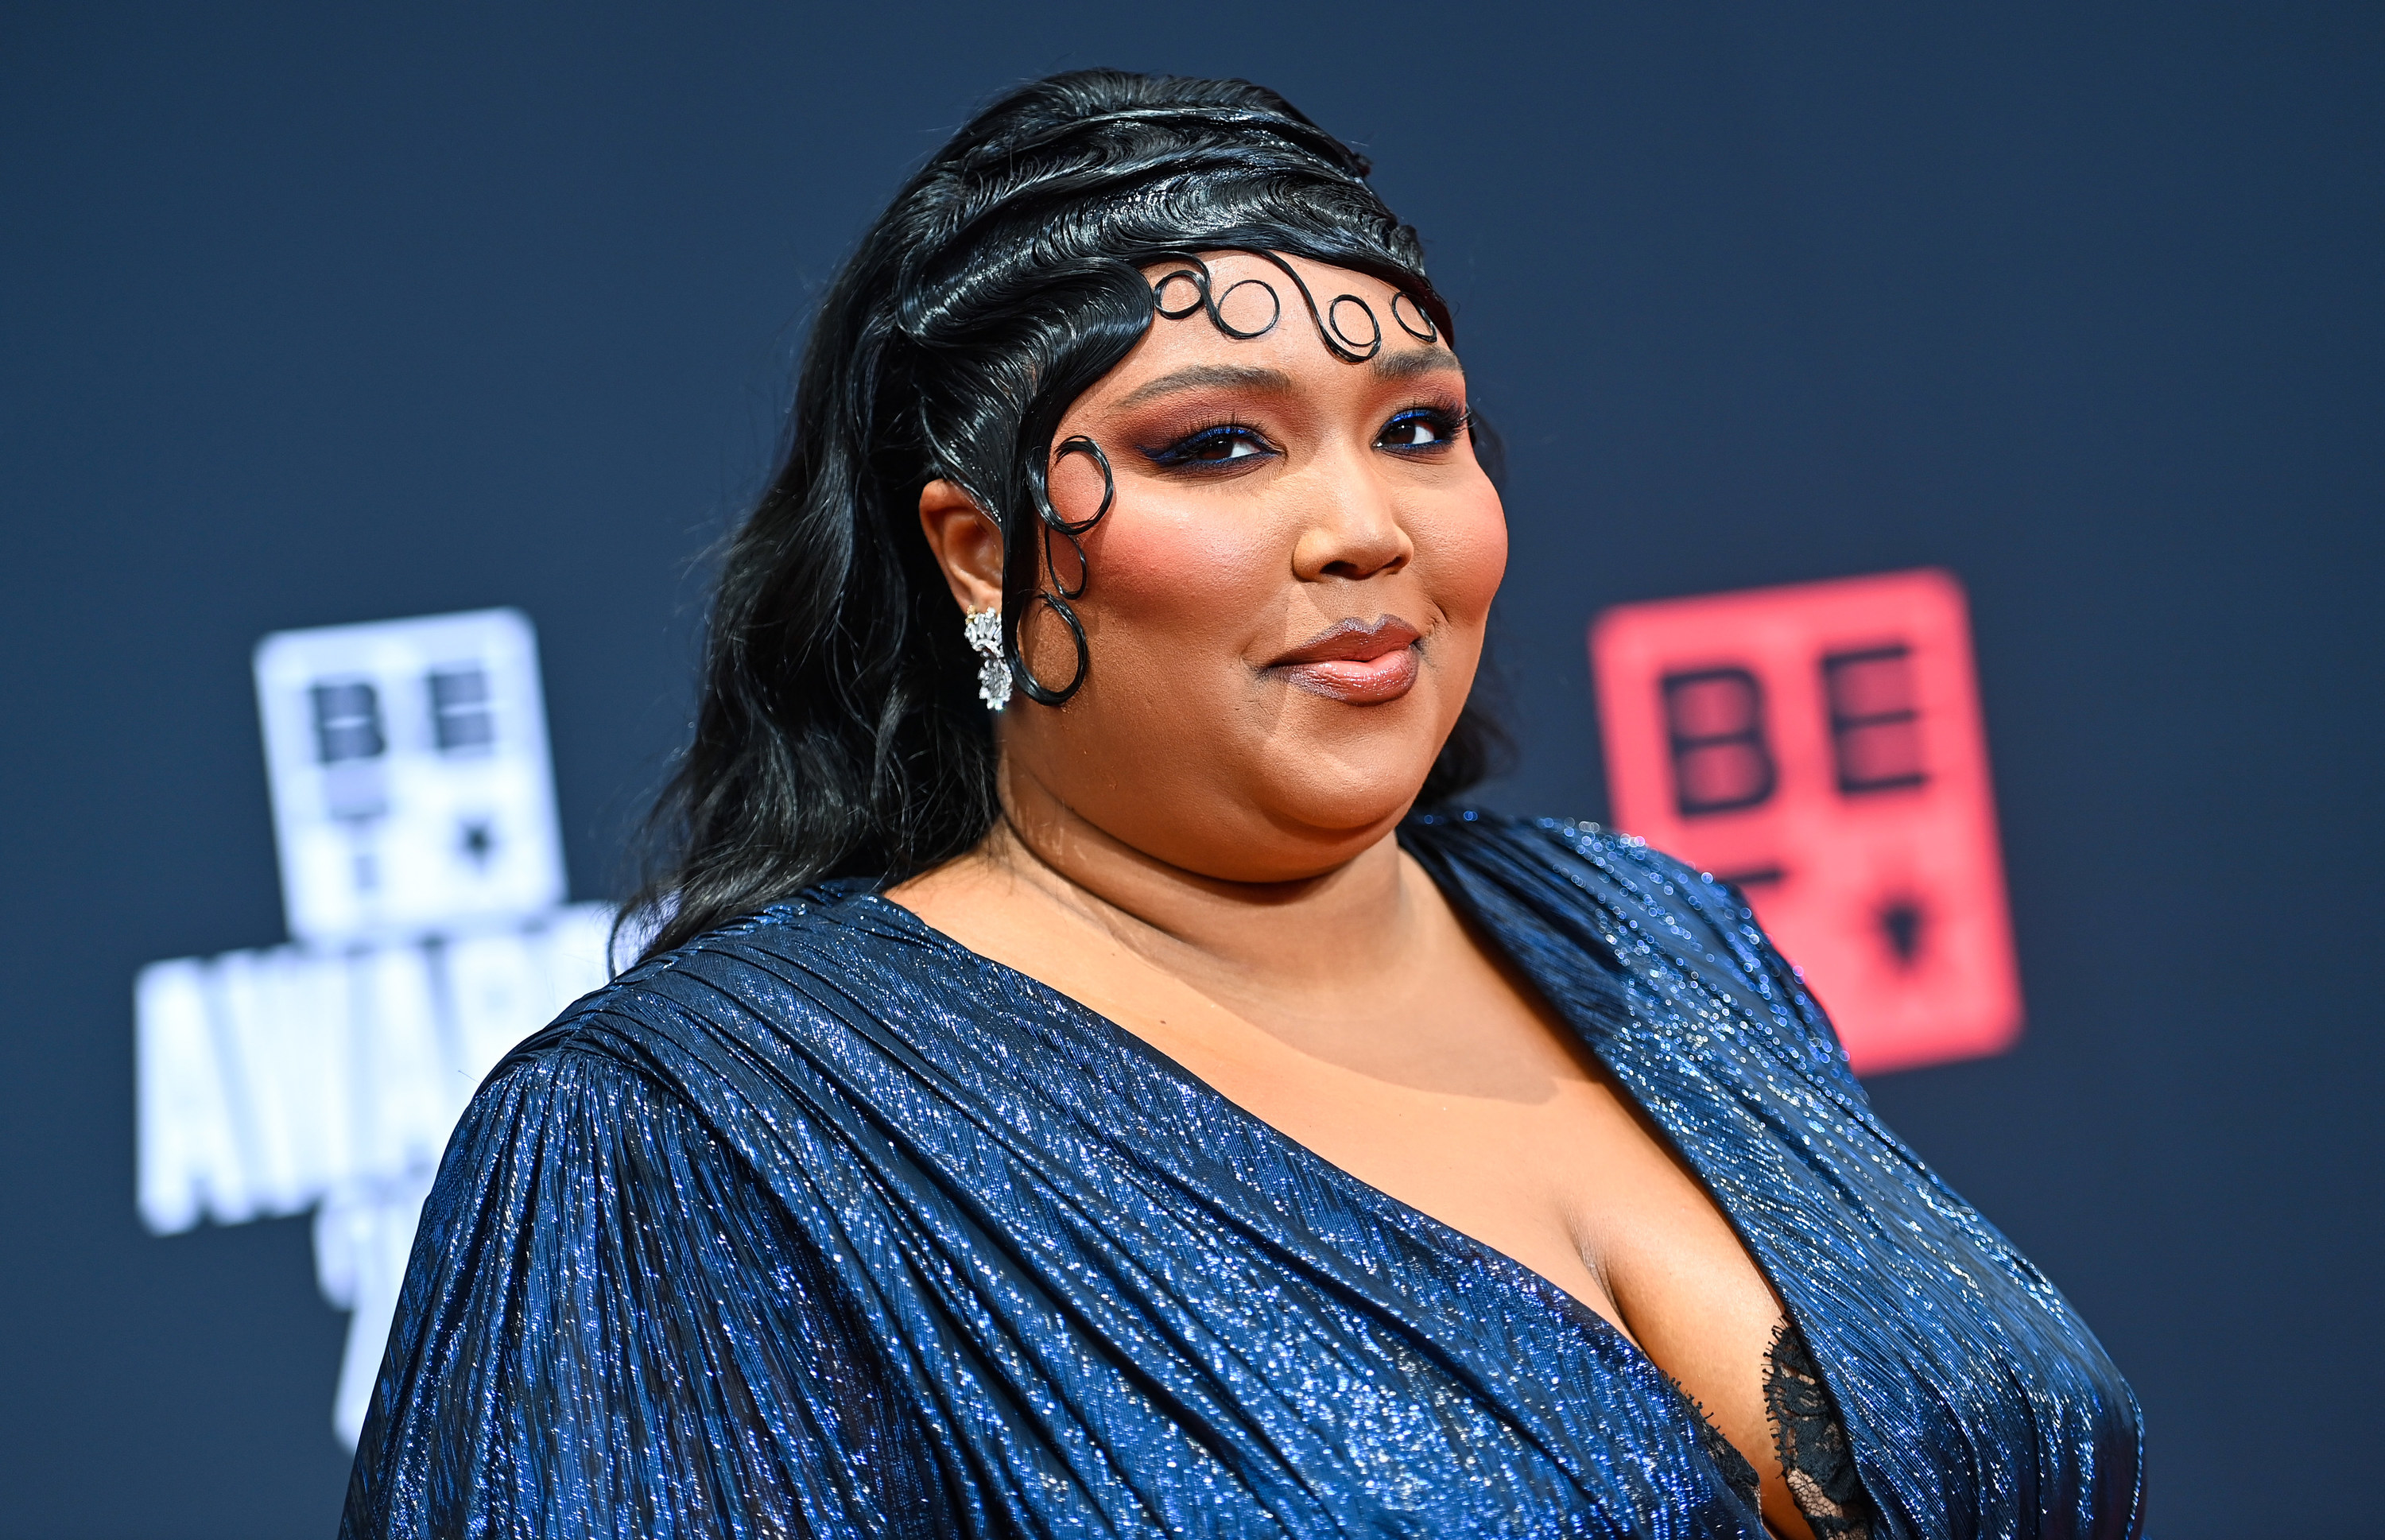 Lizzo calls herself the hero as she stuns in a new fantasy look